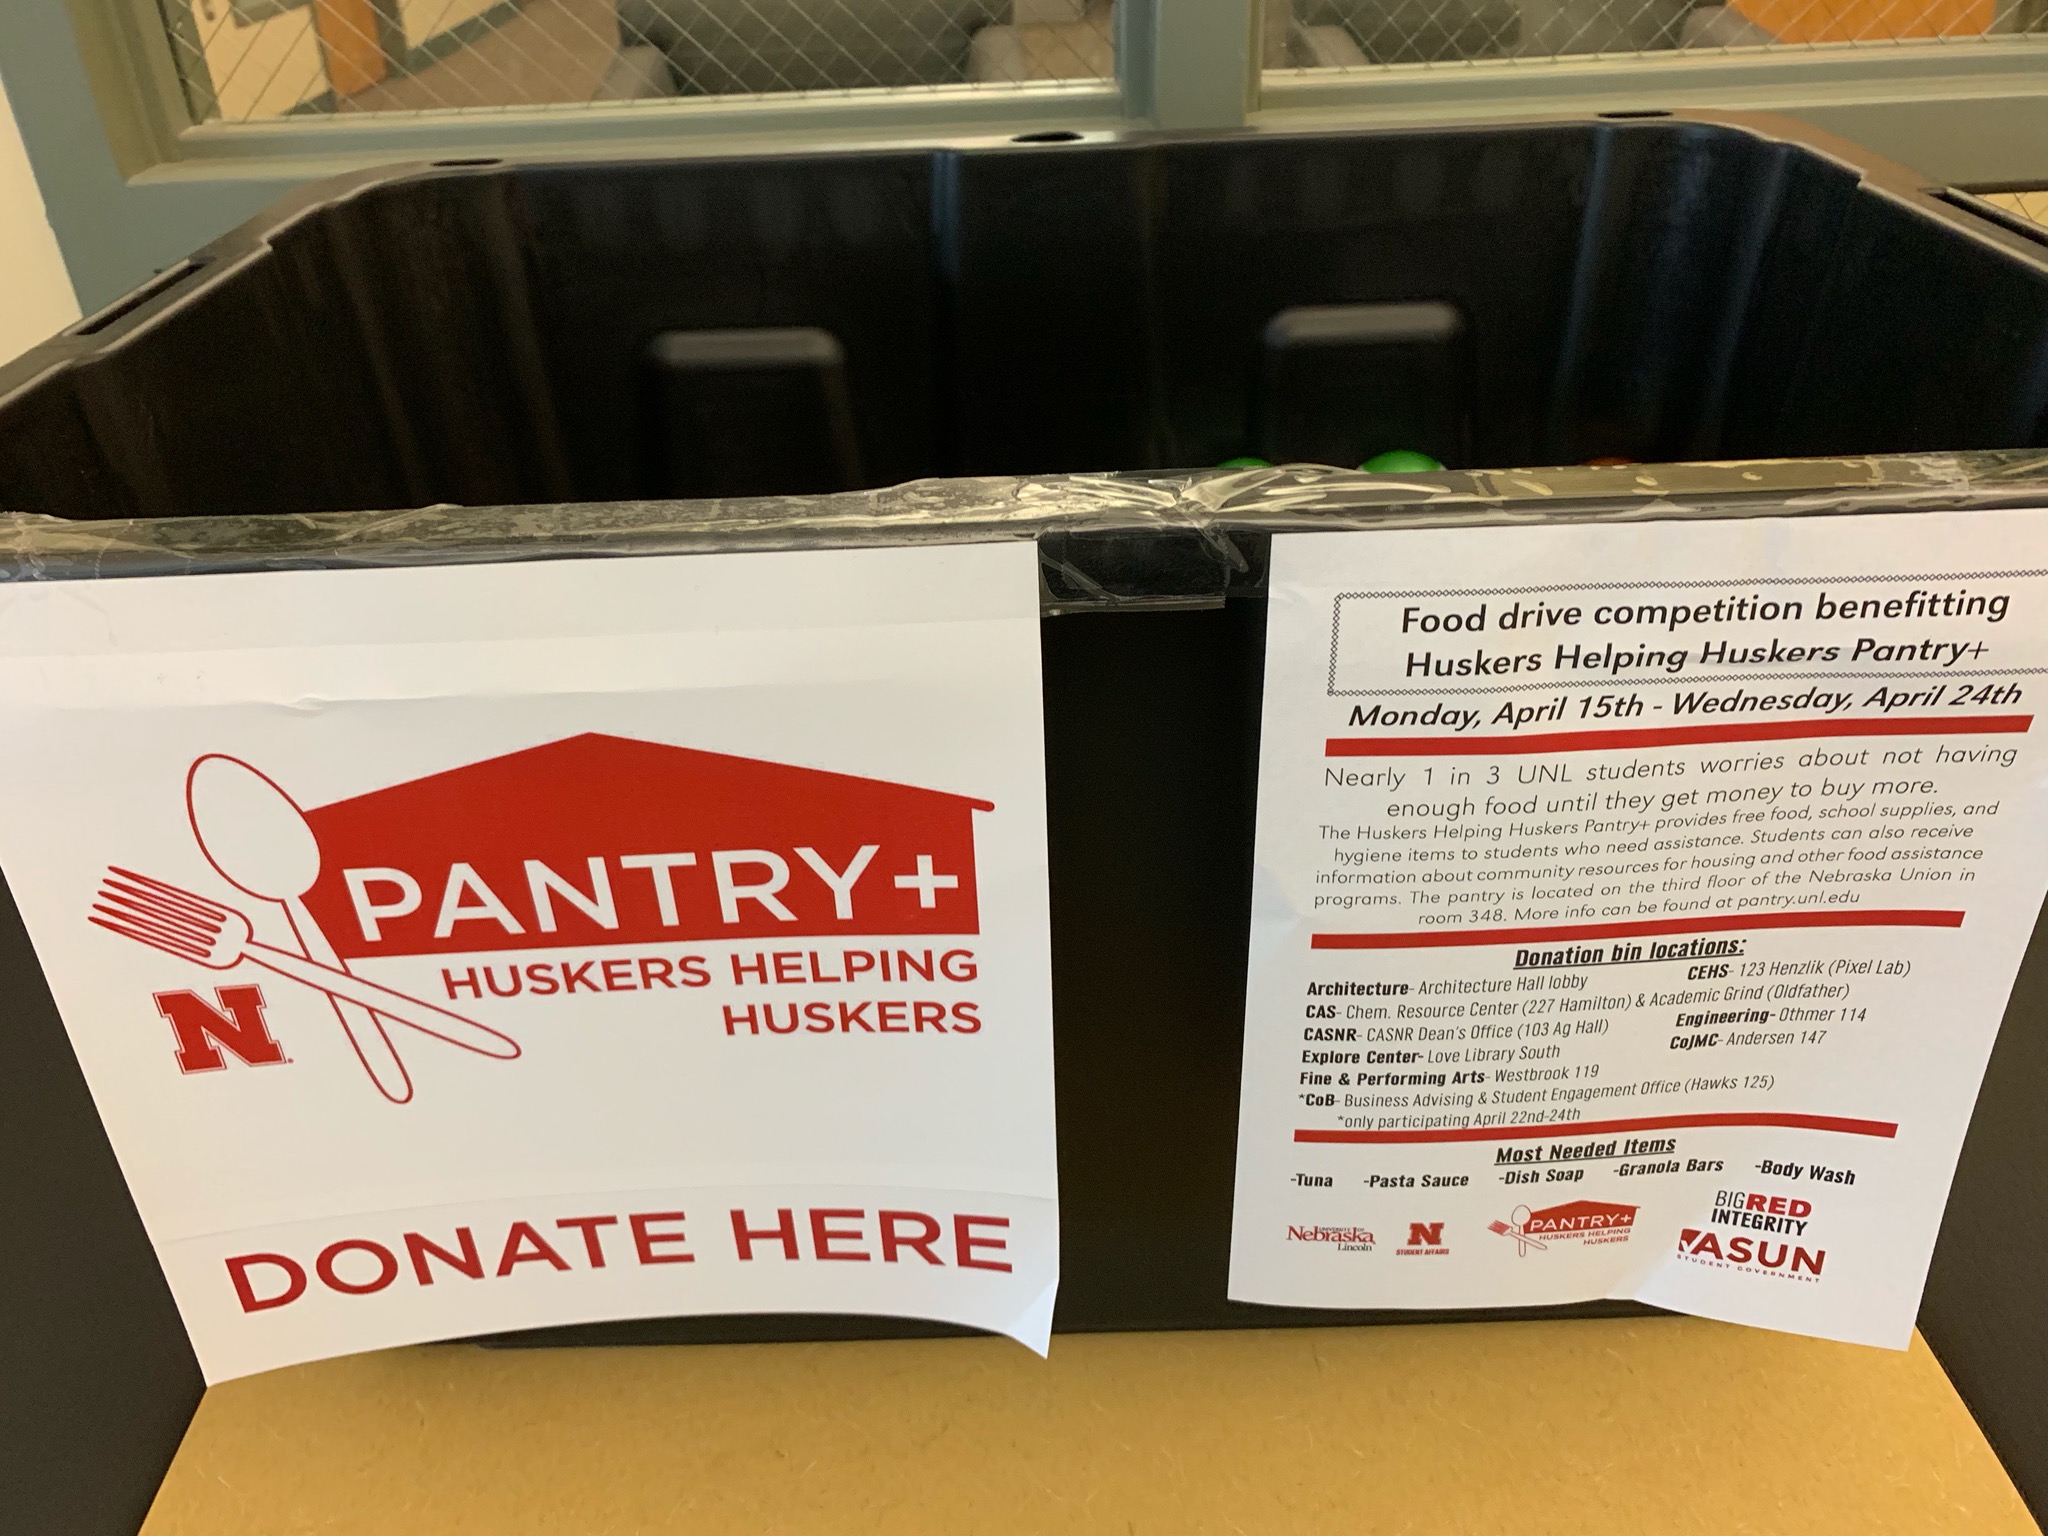 Donations for the Huskers Helping Huskers Pantry+ drive can be placed in this bin outside Othmer 114 through Wednesday, April 24.